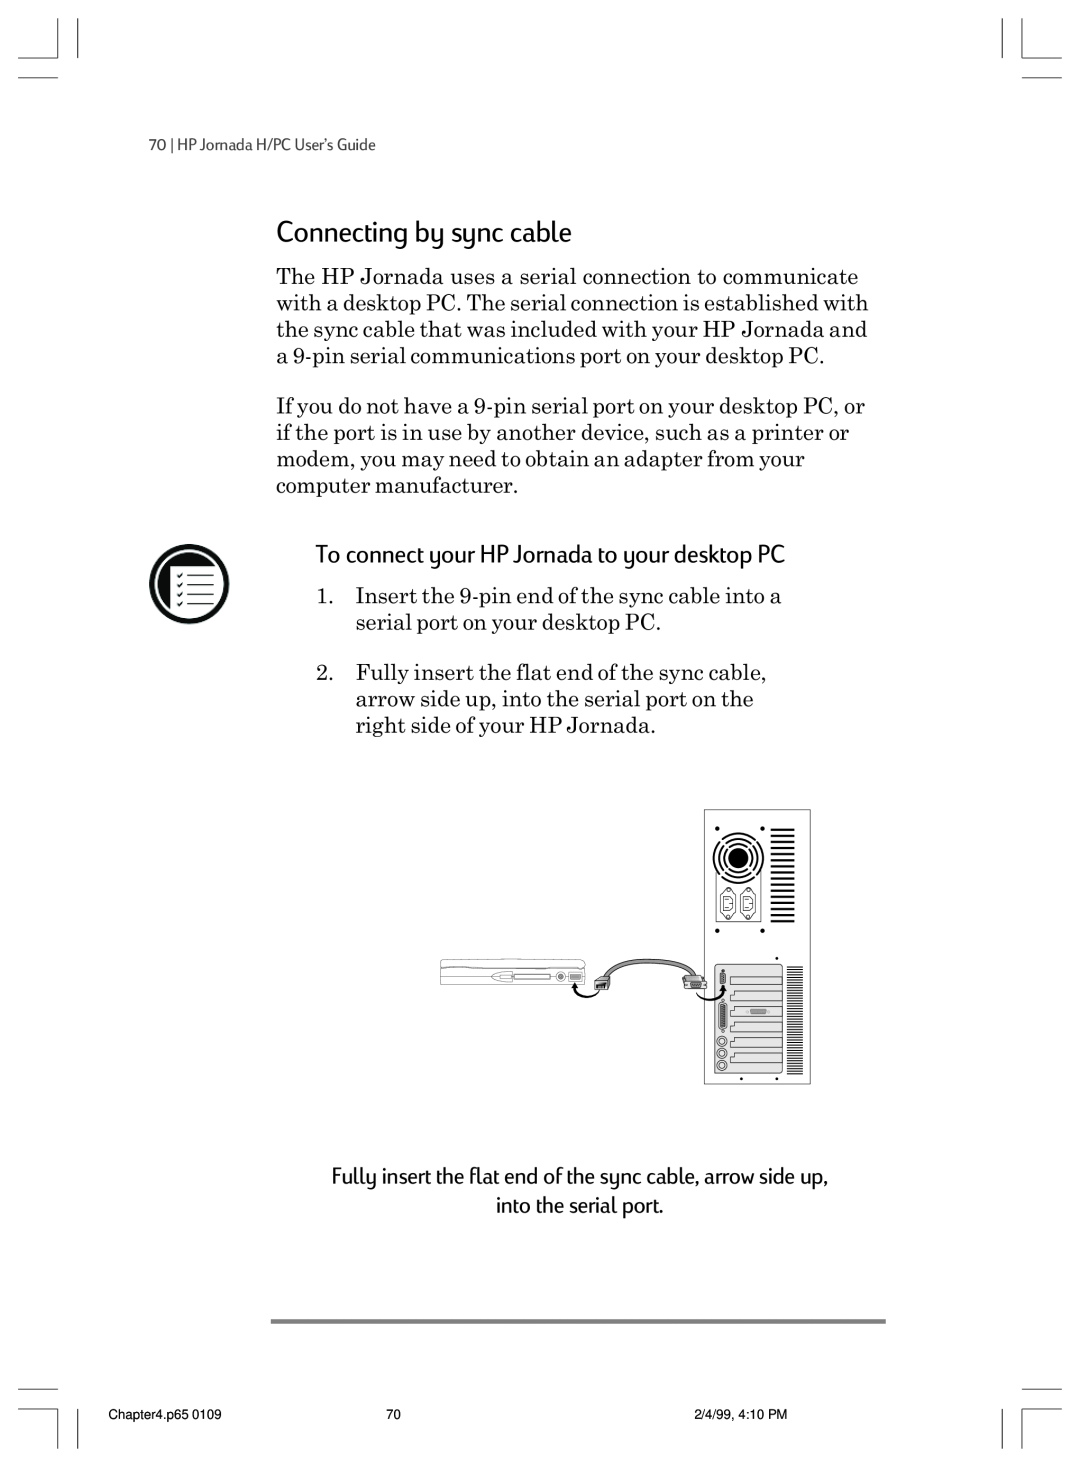 HP 820 E manual Connecting by sync cable, To connect your HP Jornada to your desktop PC, into the serial port 